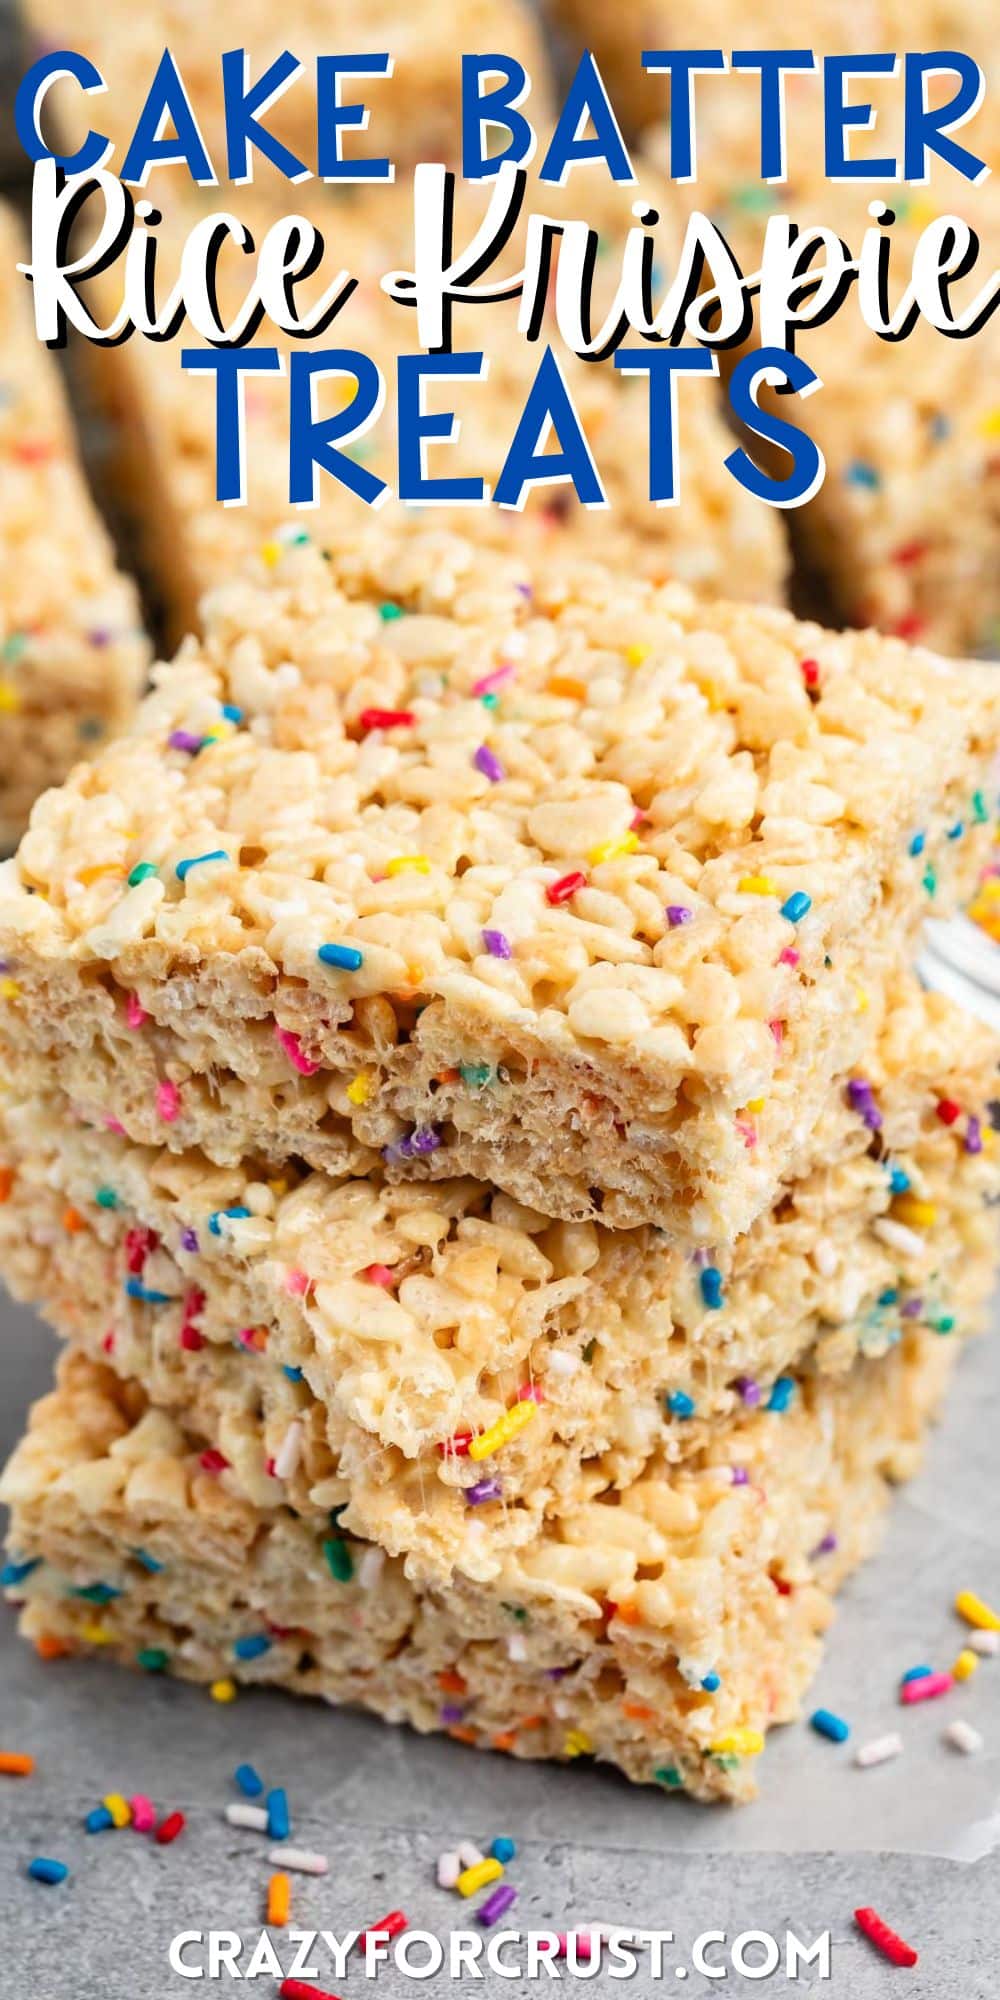 stacked Rice Krispie treats with sprinkles mixed in with words on the image.